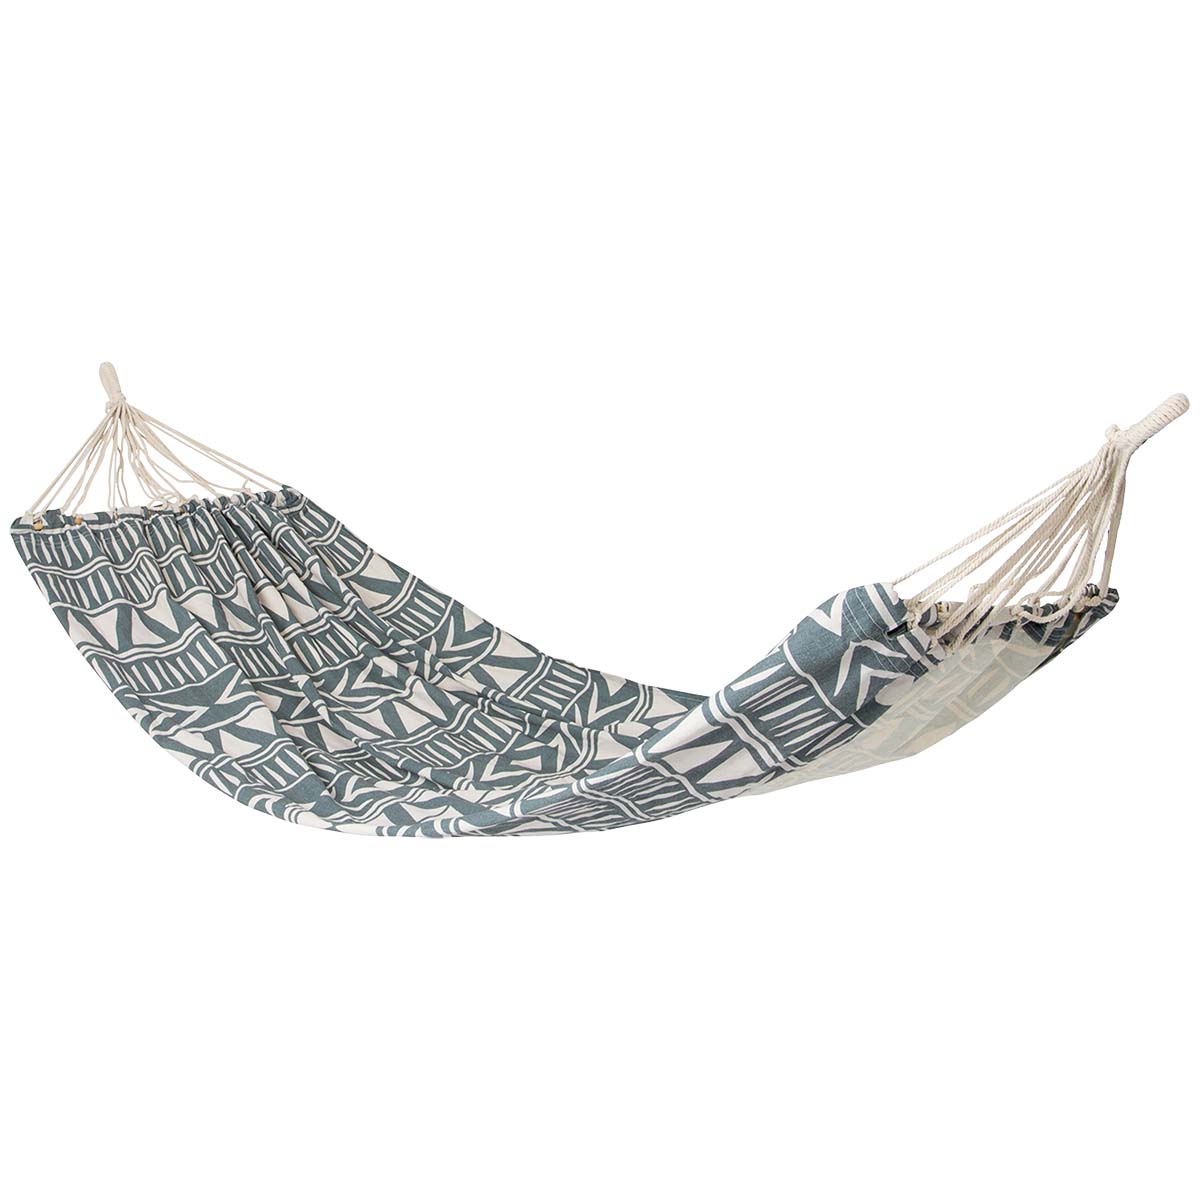 7100375 A cheerful printed and very sturdy hammock. The use of sturdy cotton/polyester allows you to relax in this hammock.  Take the hammock with you on vacation or hang in the garden or balcony. The maximum load is 200 kilograms.